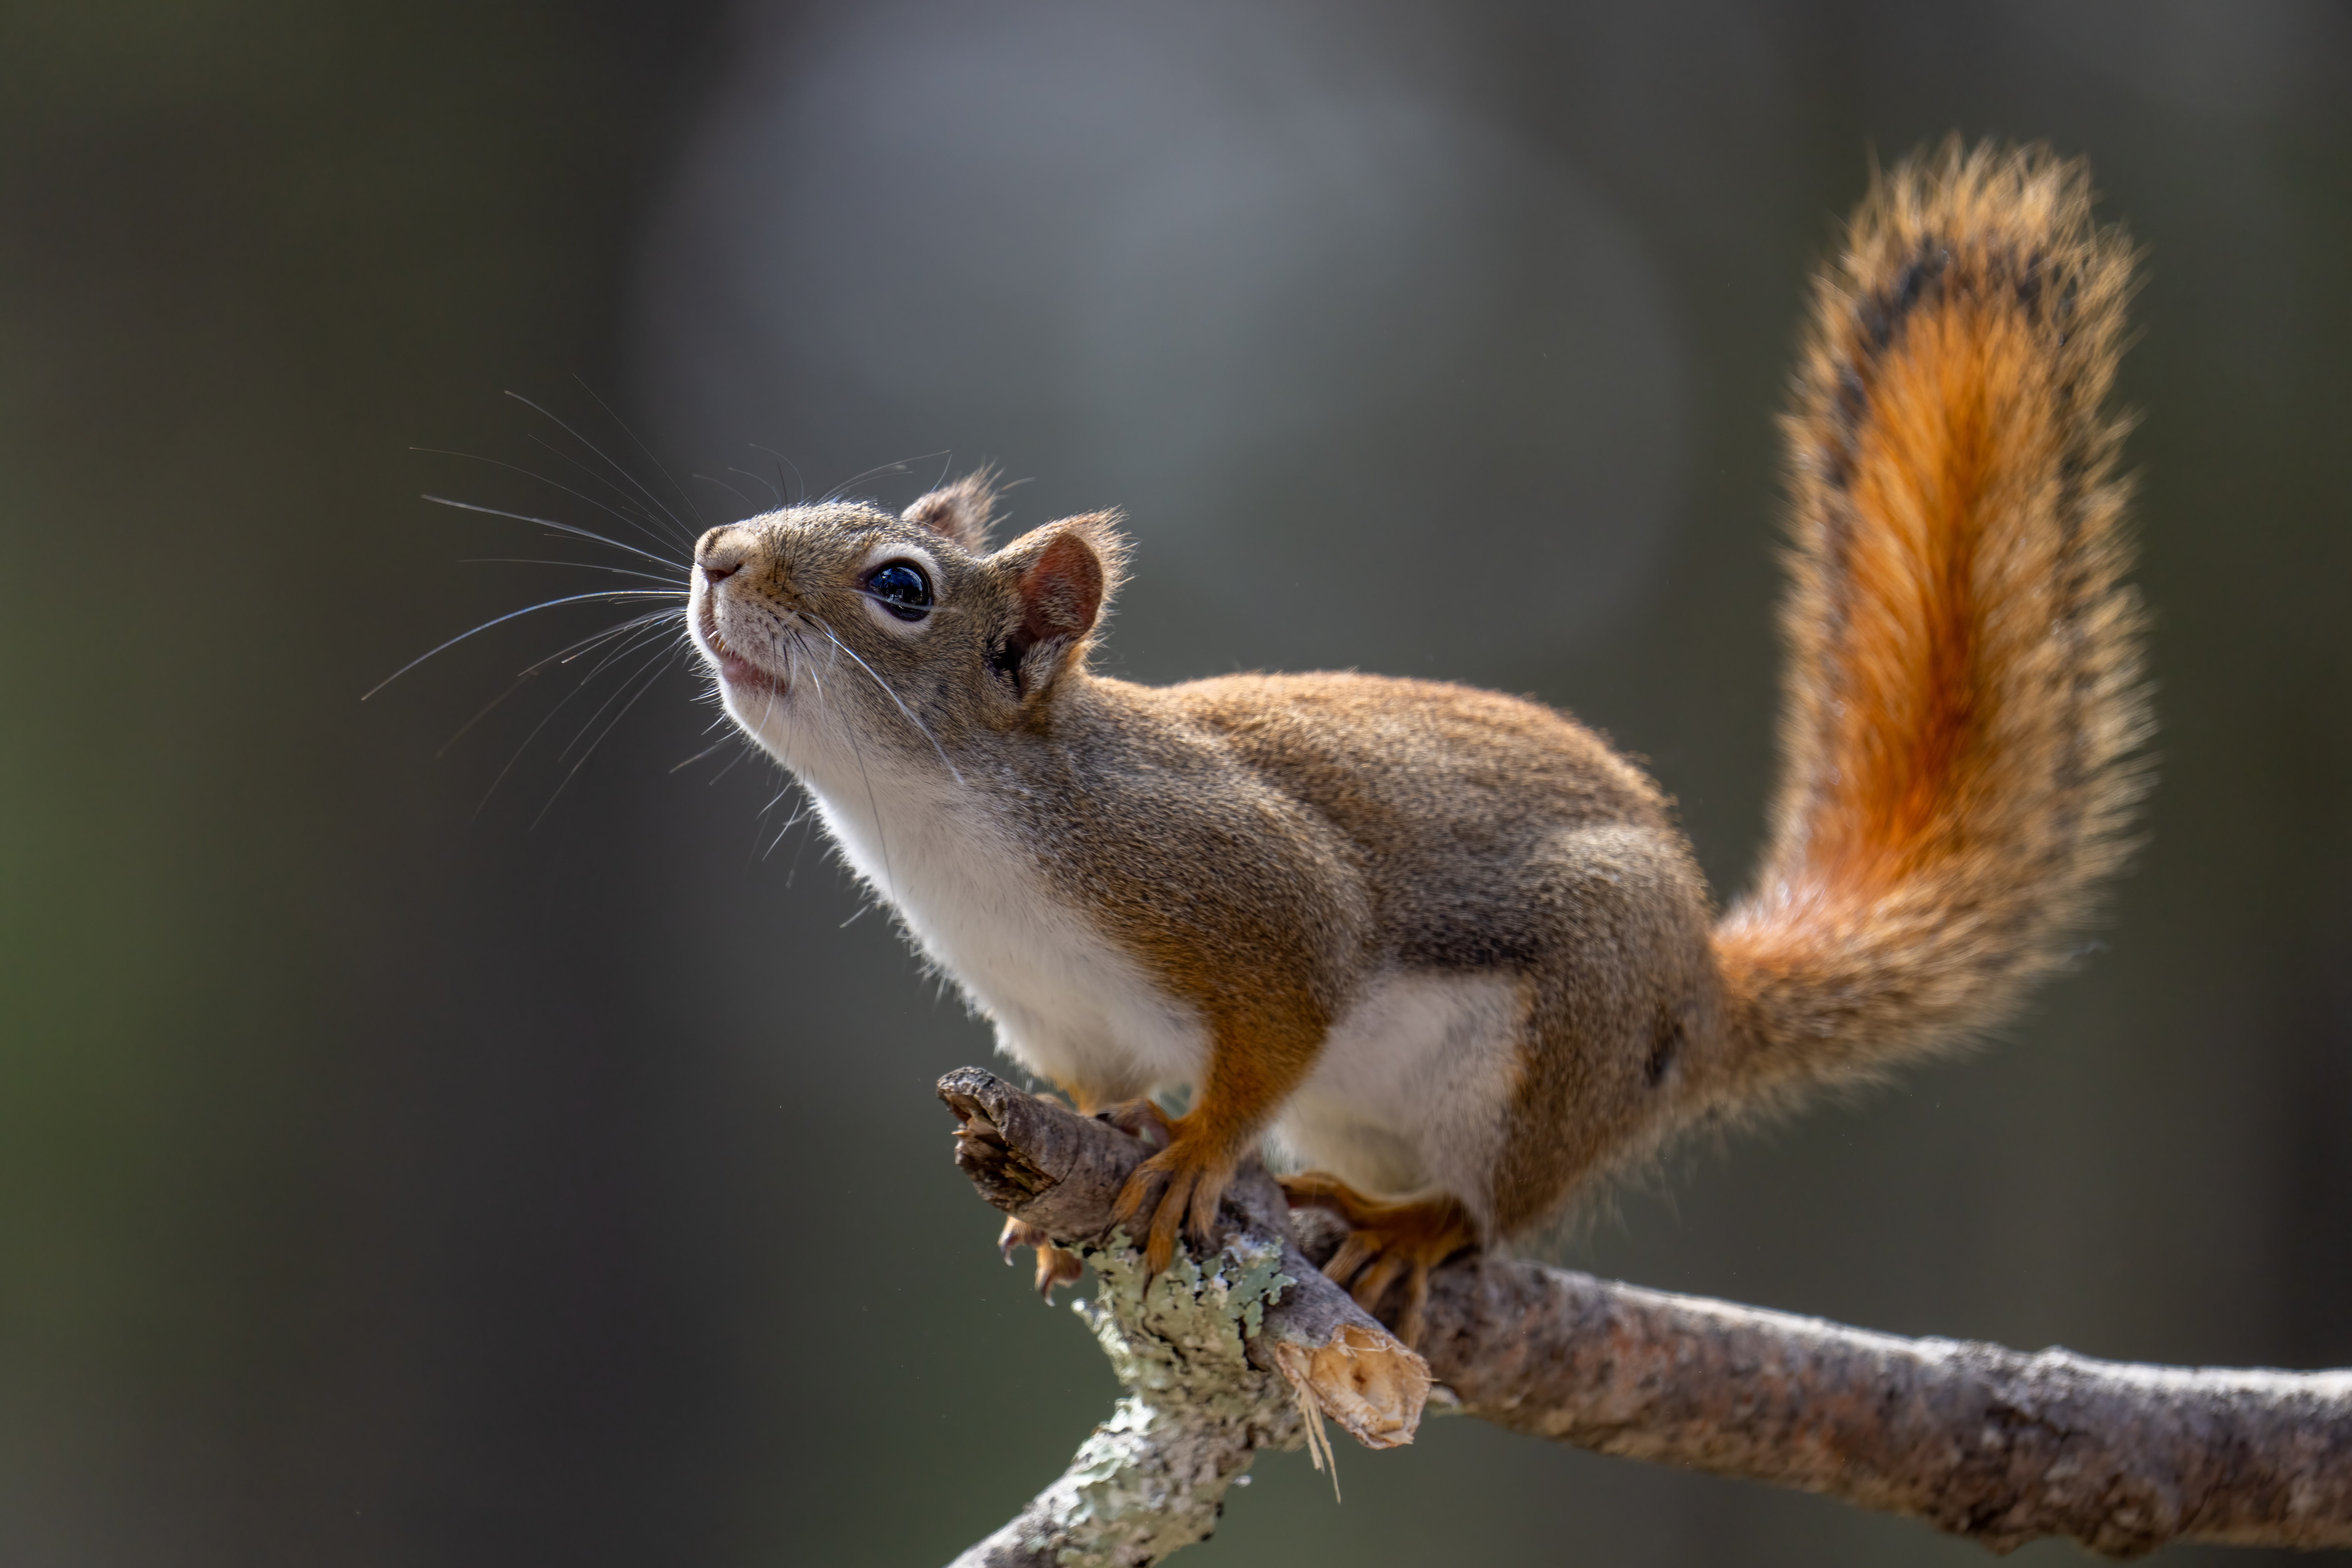 a photo of a squirrel on a branch looking up.